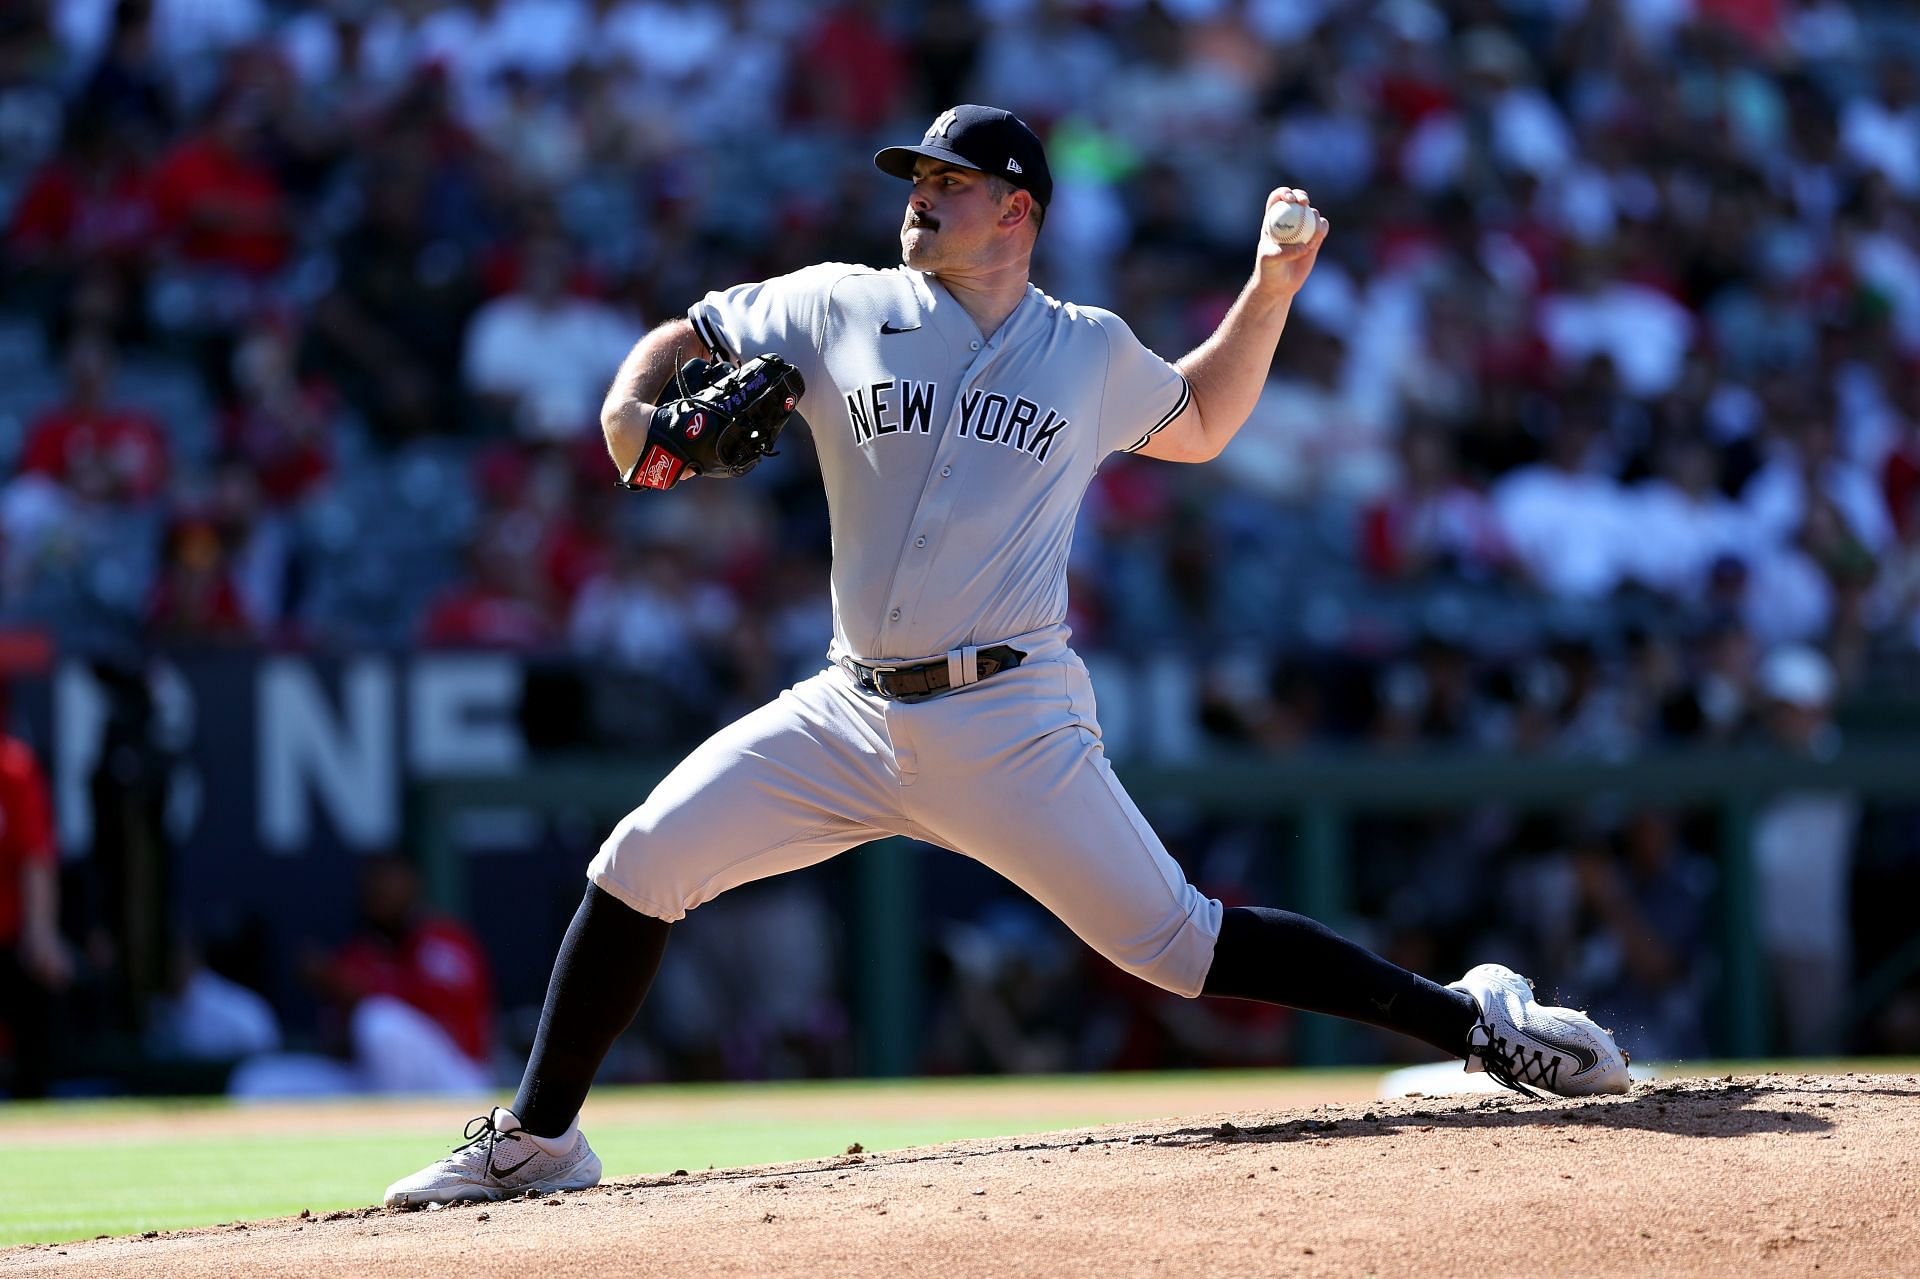 Carlos Rodon of the New York Yankees pitches against the Los Angeles Angels at Angel Stadium of Anaheim